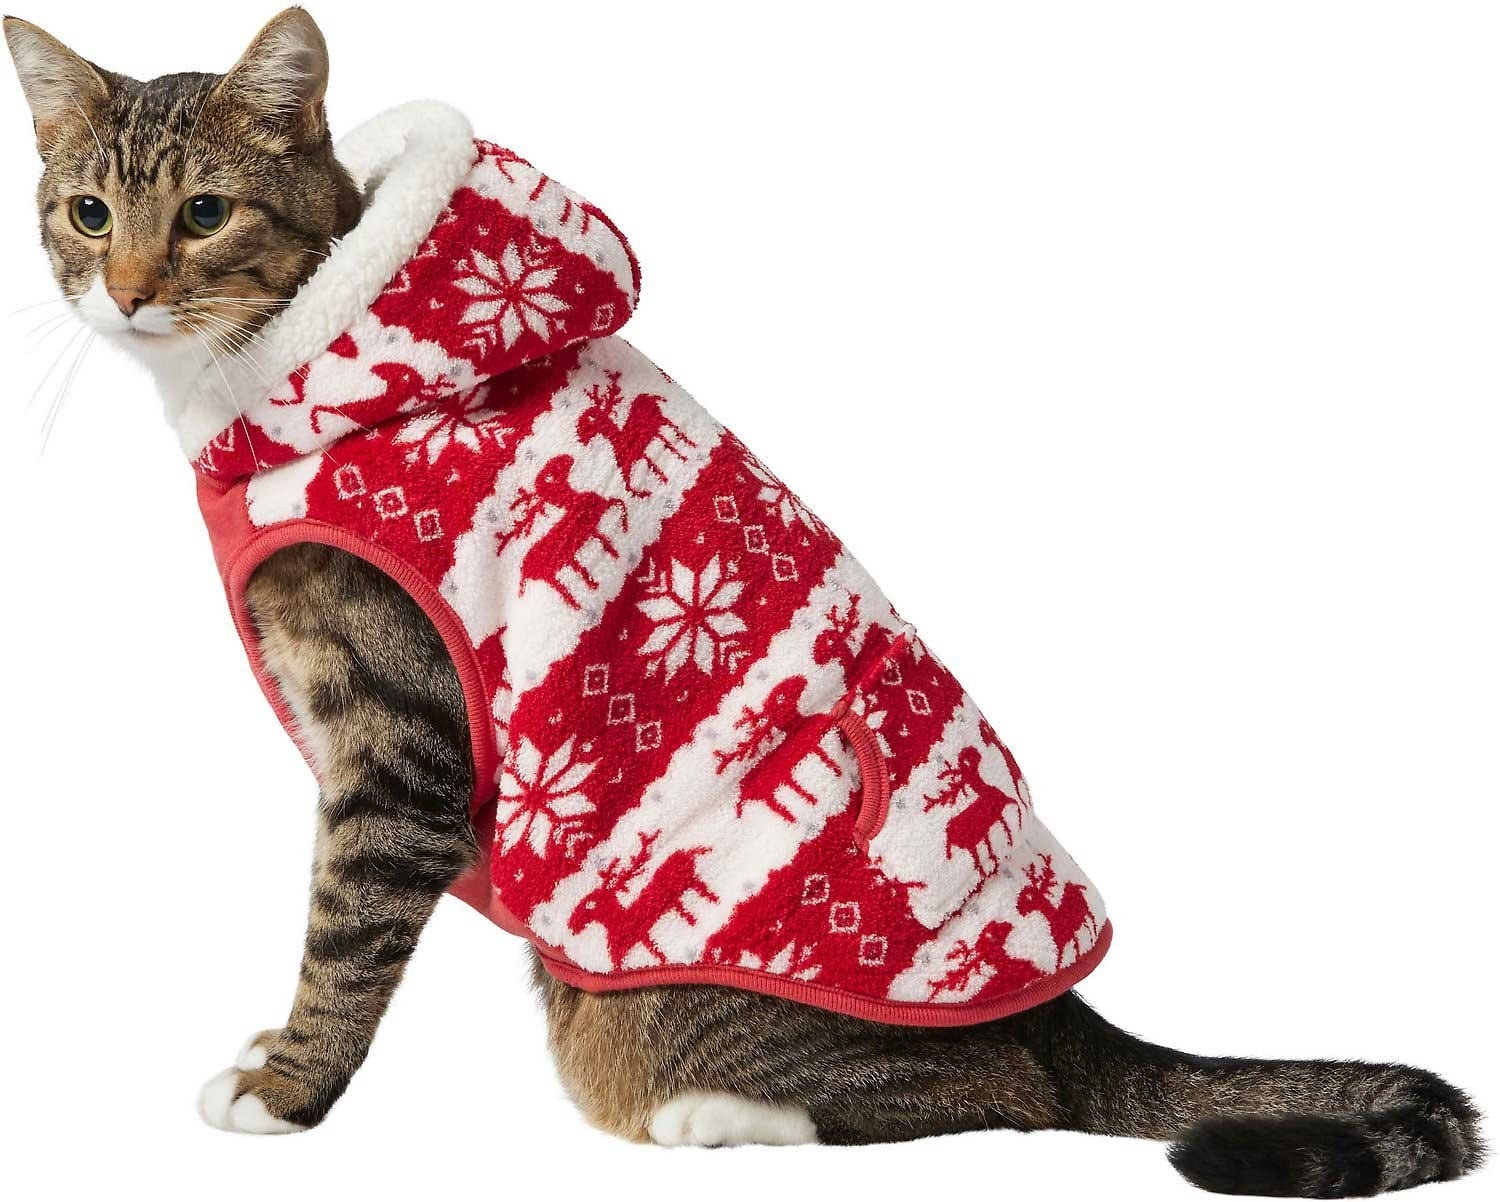 cat in a red and white fair isle fleece hoodie